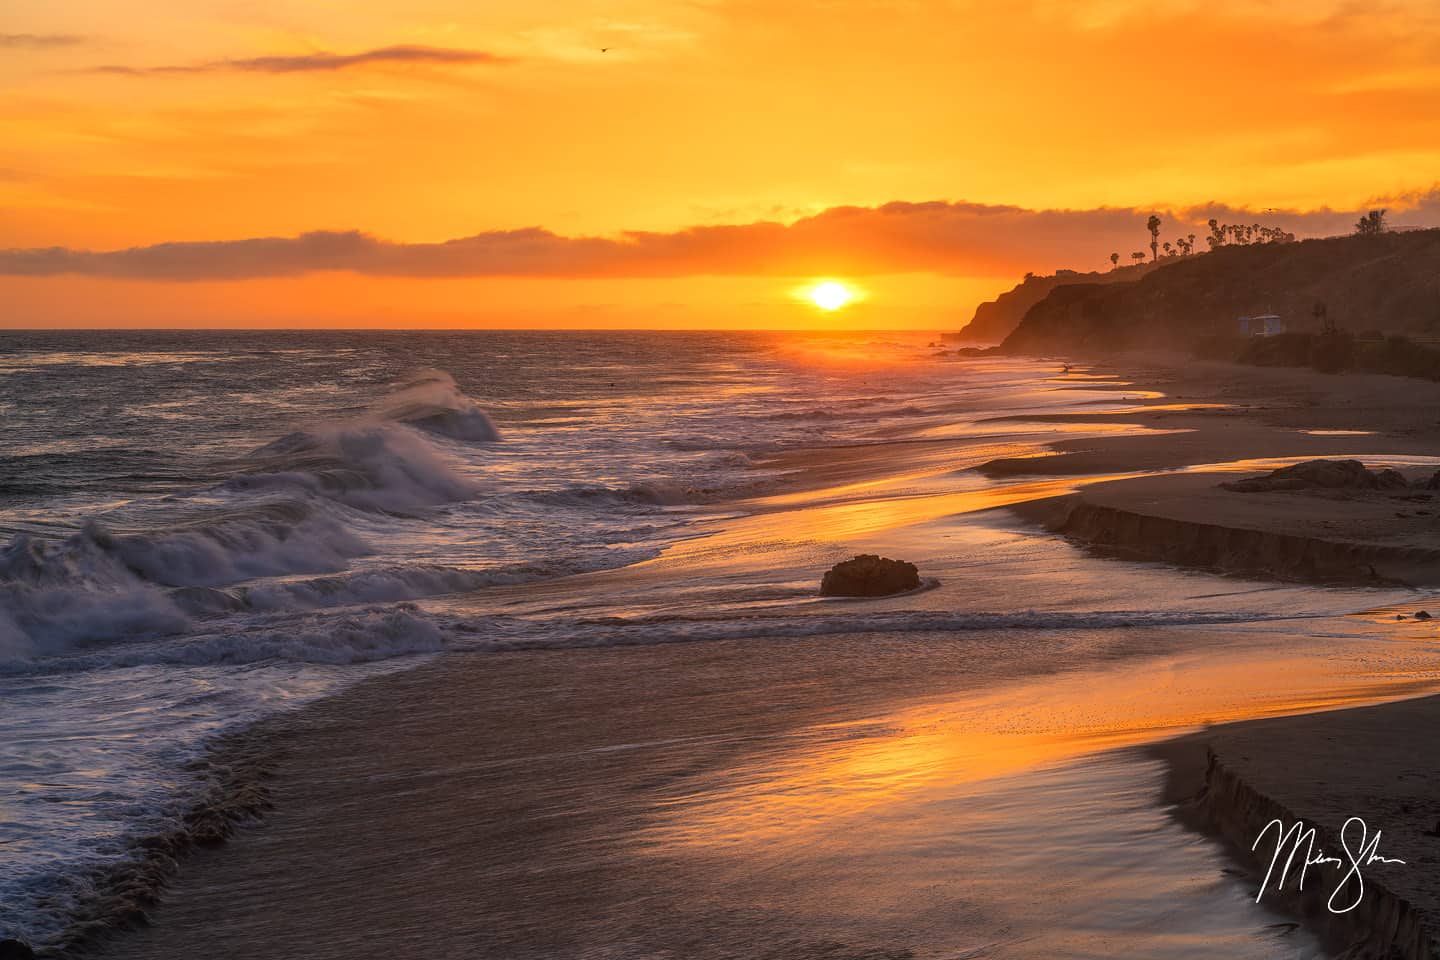 A beautiful and vivid sunset over the beaches of Malibu. Taken at Leo Carillo State Beach, the waves were crashing against the rocks, while the palm trees above lined the rocky coastline.